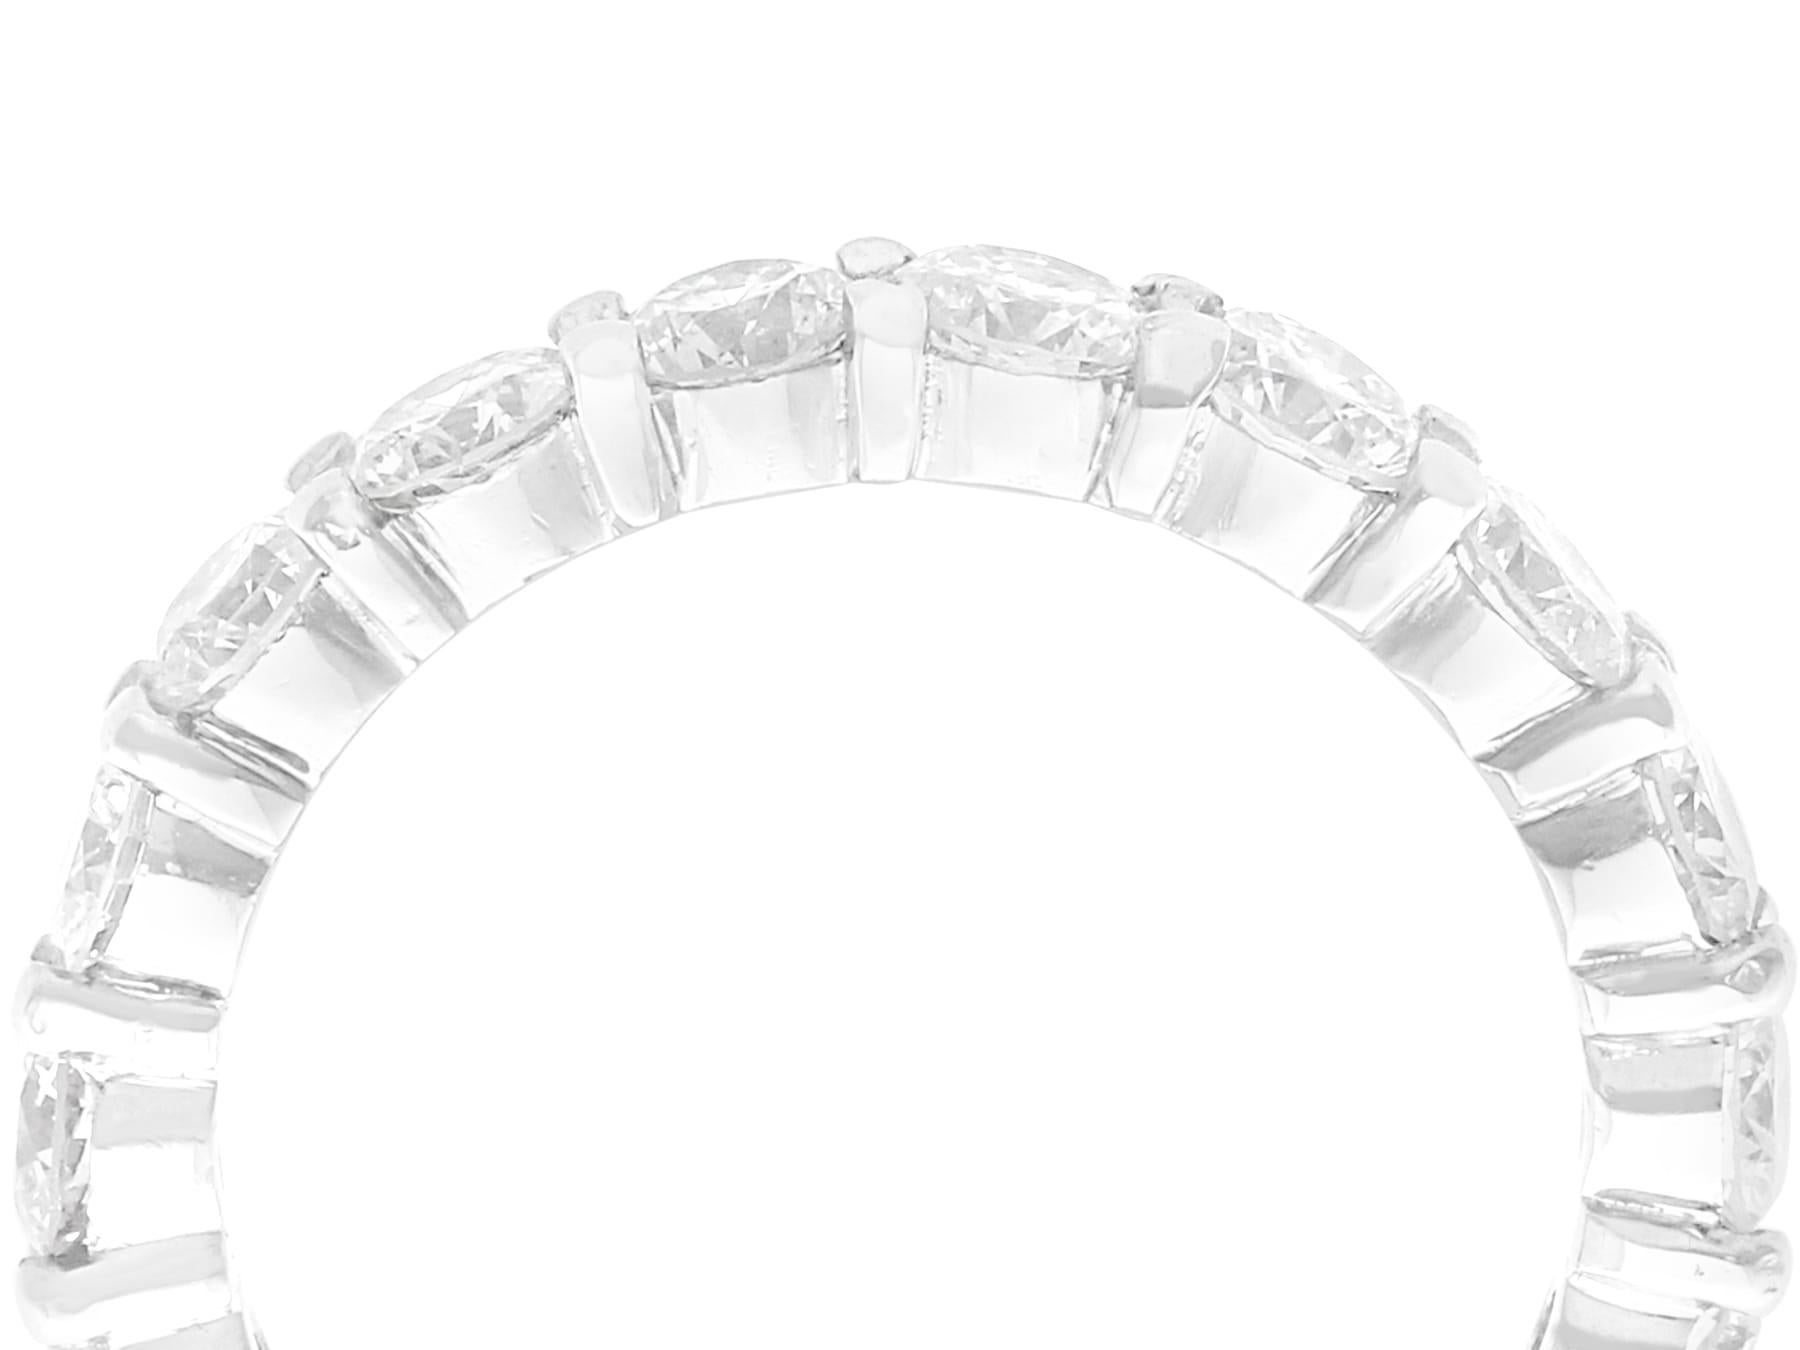 A stunning, fine and impressive vintage 3.15 carat diamond and platinum full eternity ring; part of our vintage diamond ring collections.

This stunning, fine and impressive diamond eternity ring has been crafted in platinum.

This vintage diamond